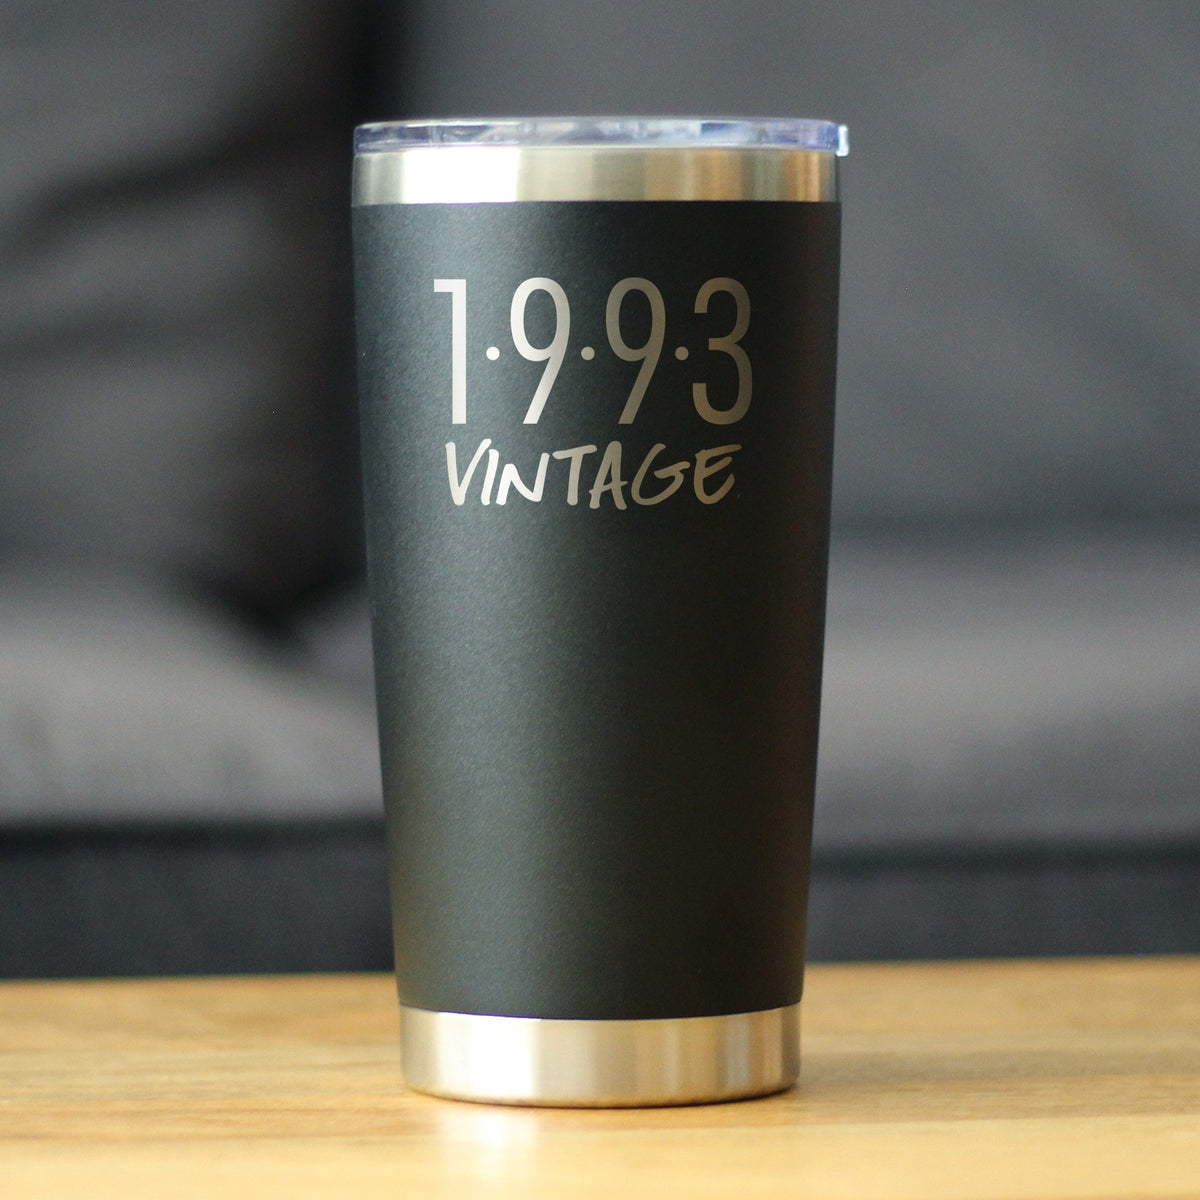 Vintage 1993 - Insulated Coffee Tumbler Cup with Sliding Lid - 20 oz - Funny 31st Birthday Gift for Women or Men Turning 31